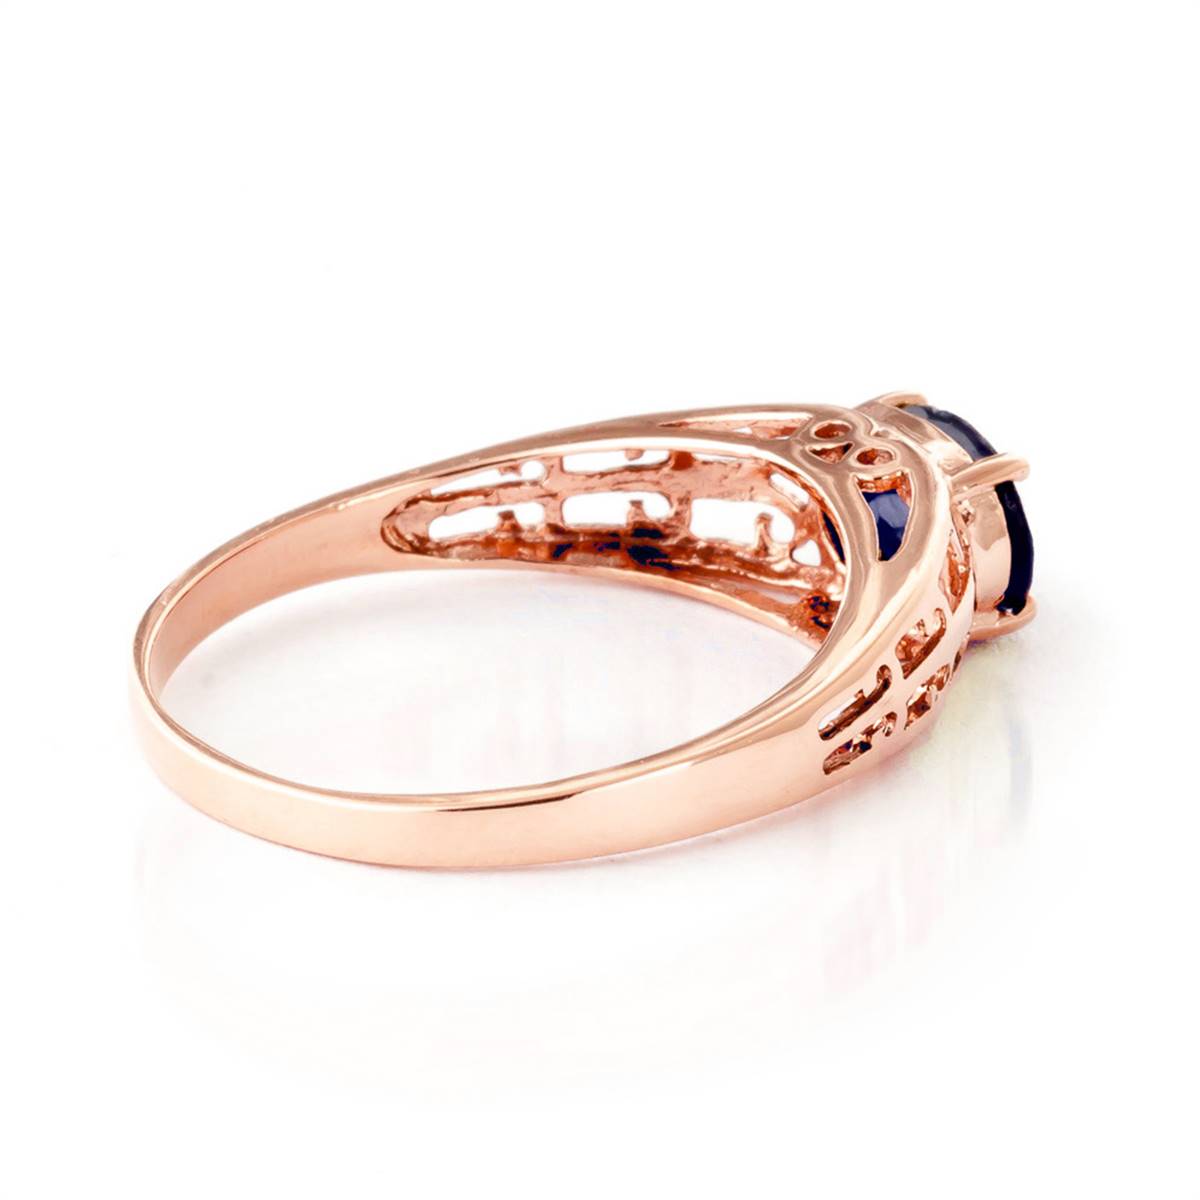 14K Solid Rose Gold Filigree Ring w/ Natural Sapphire